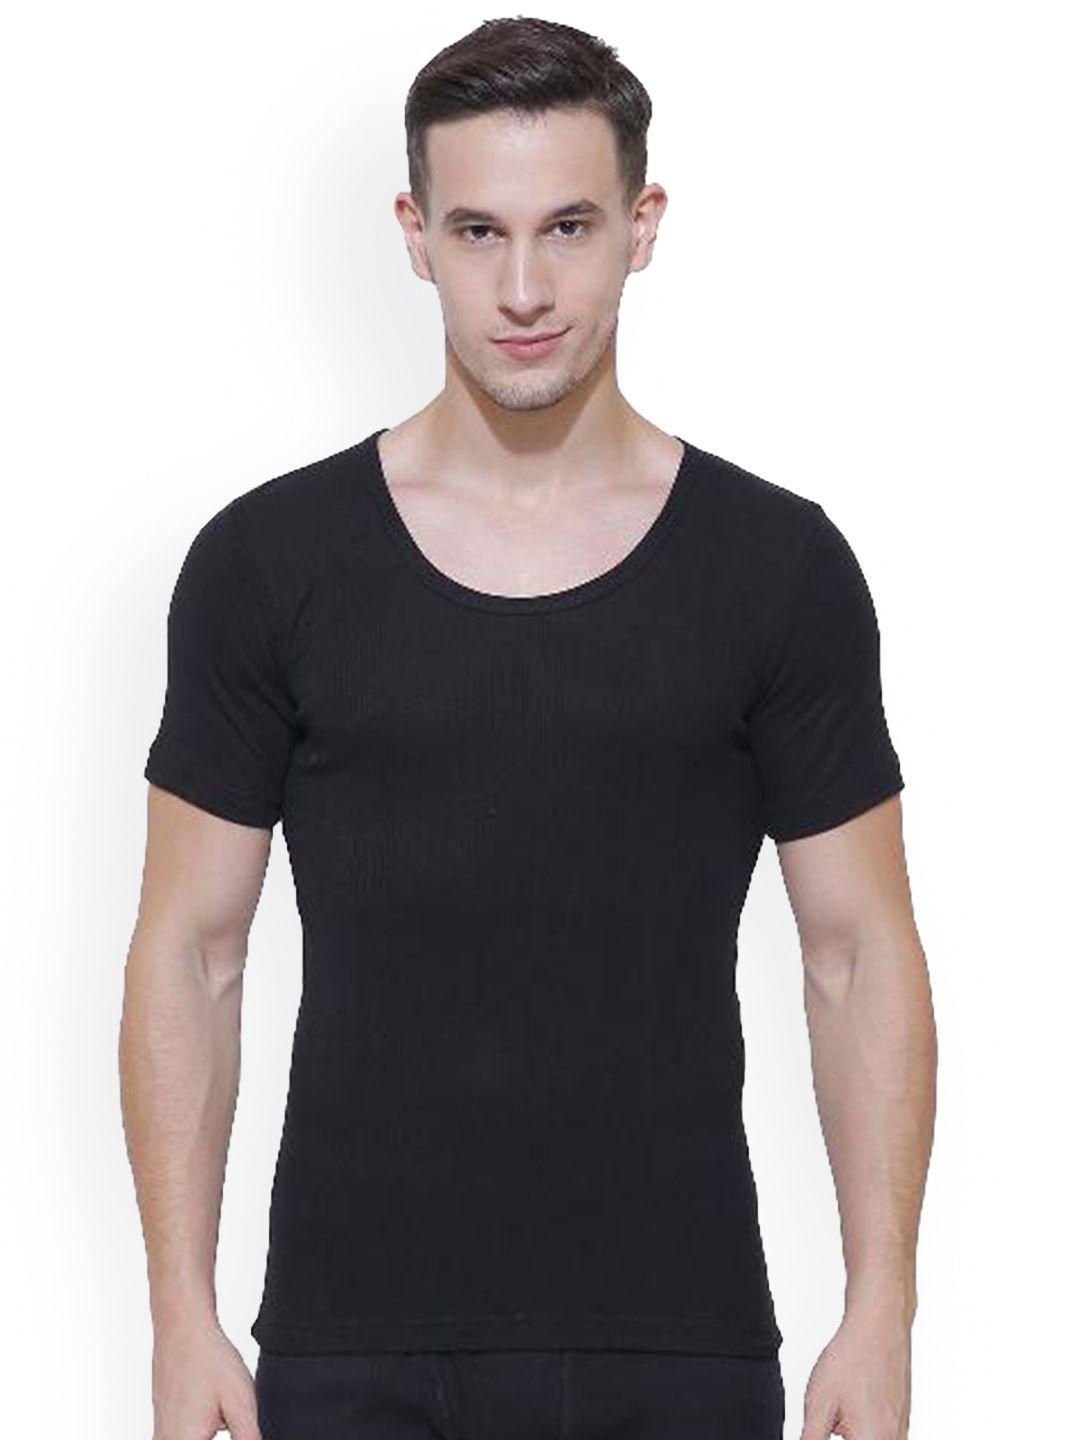 bodycare insider round neck cotton thermal top